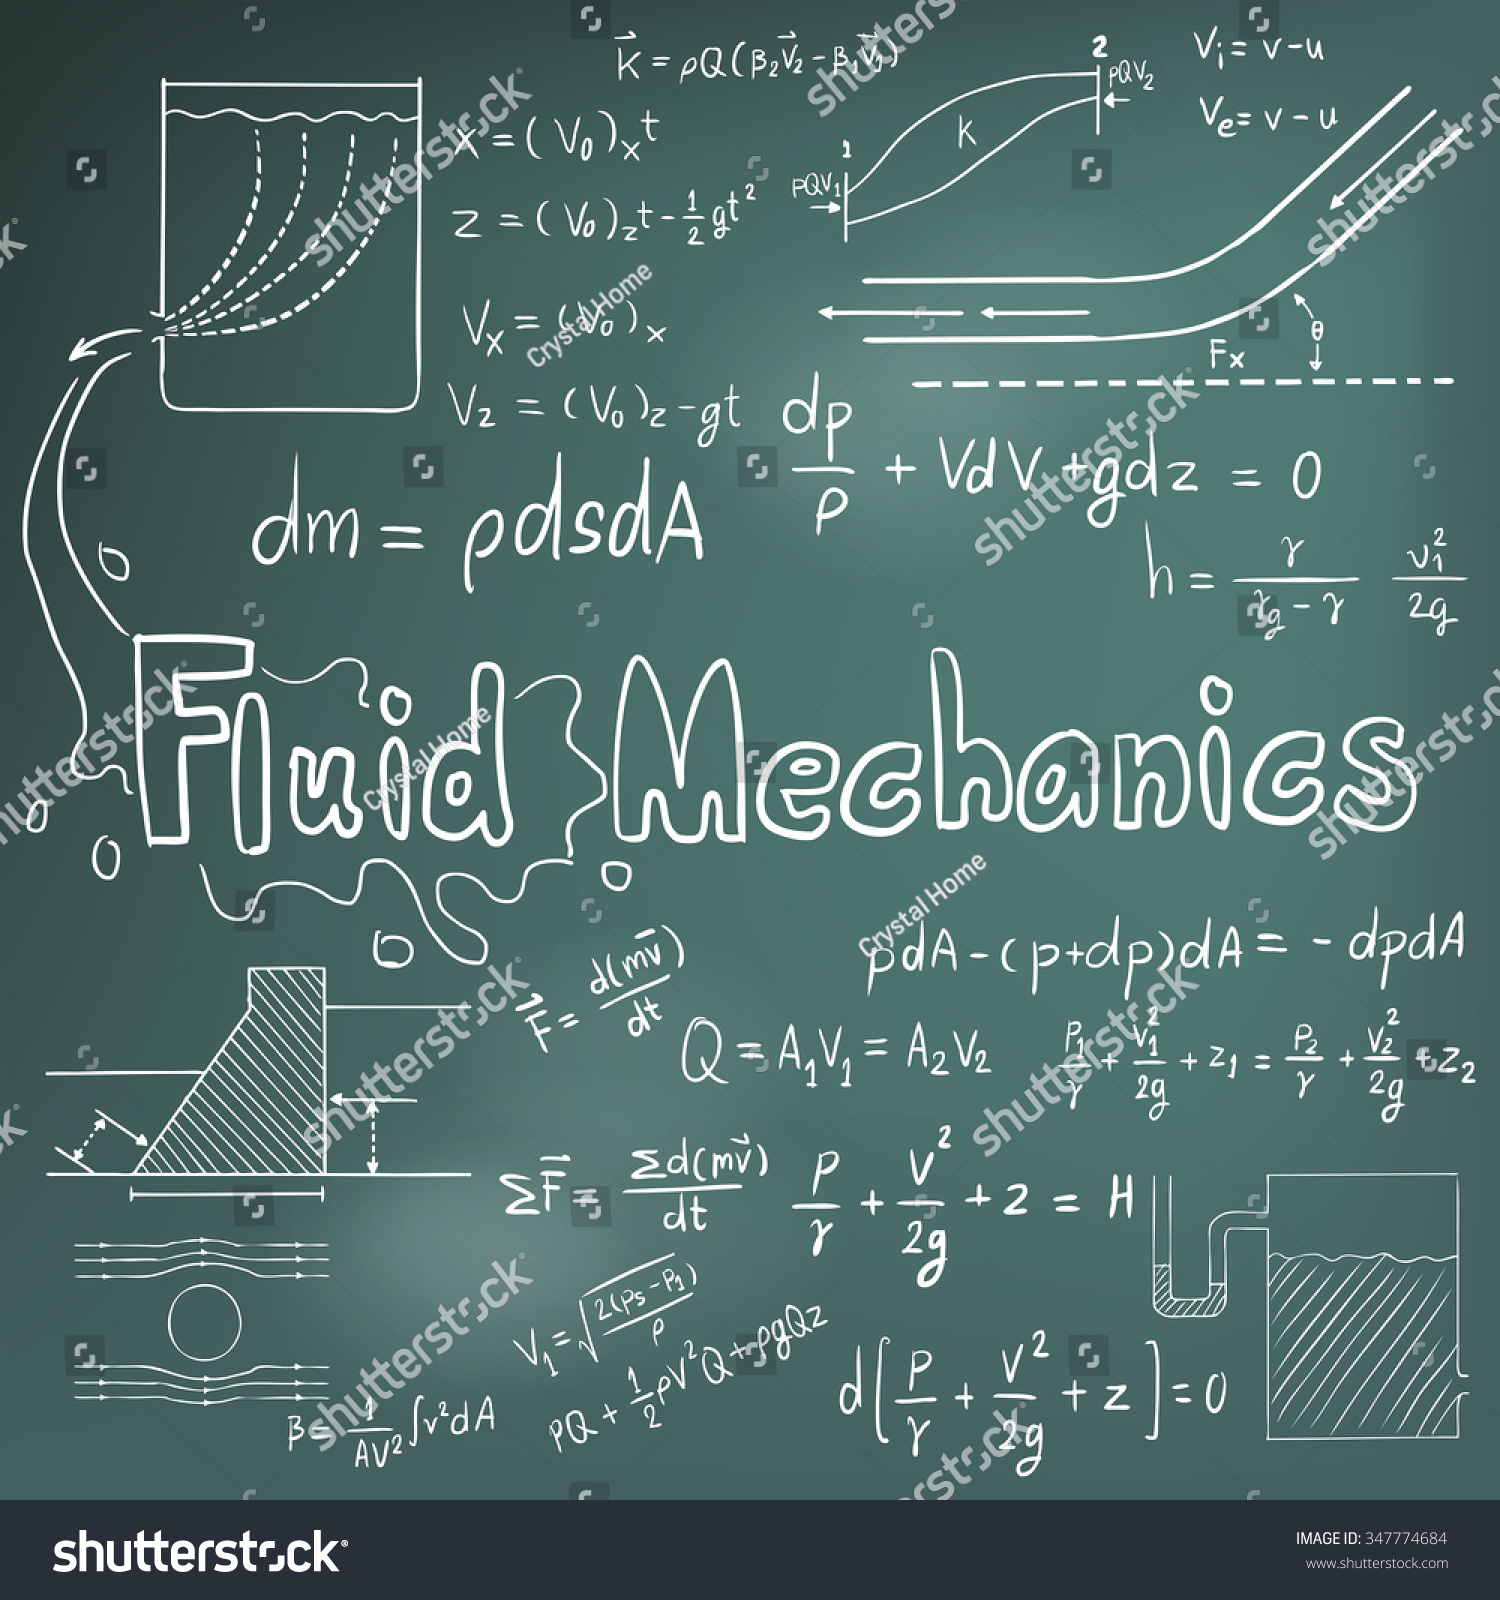 SVG of Mechanic of Fluid law theory and physics mathematical formula equation, doodle handwriting icon in blackboard background with hand drawn model, create by vector
 svg